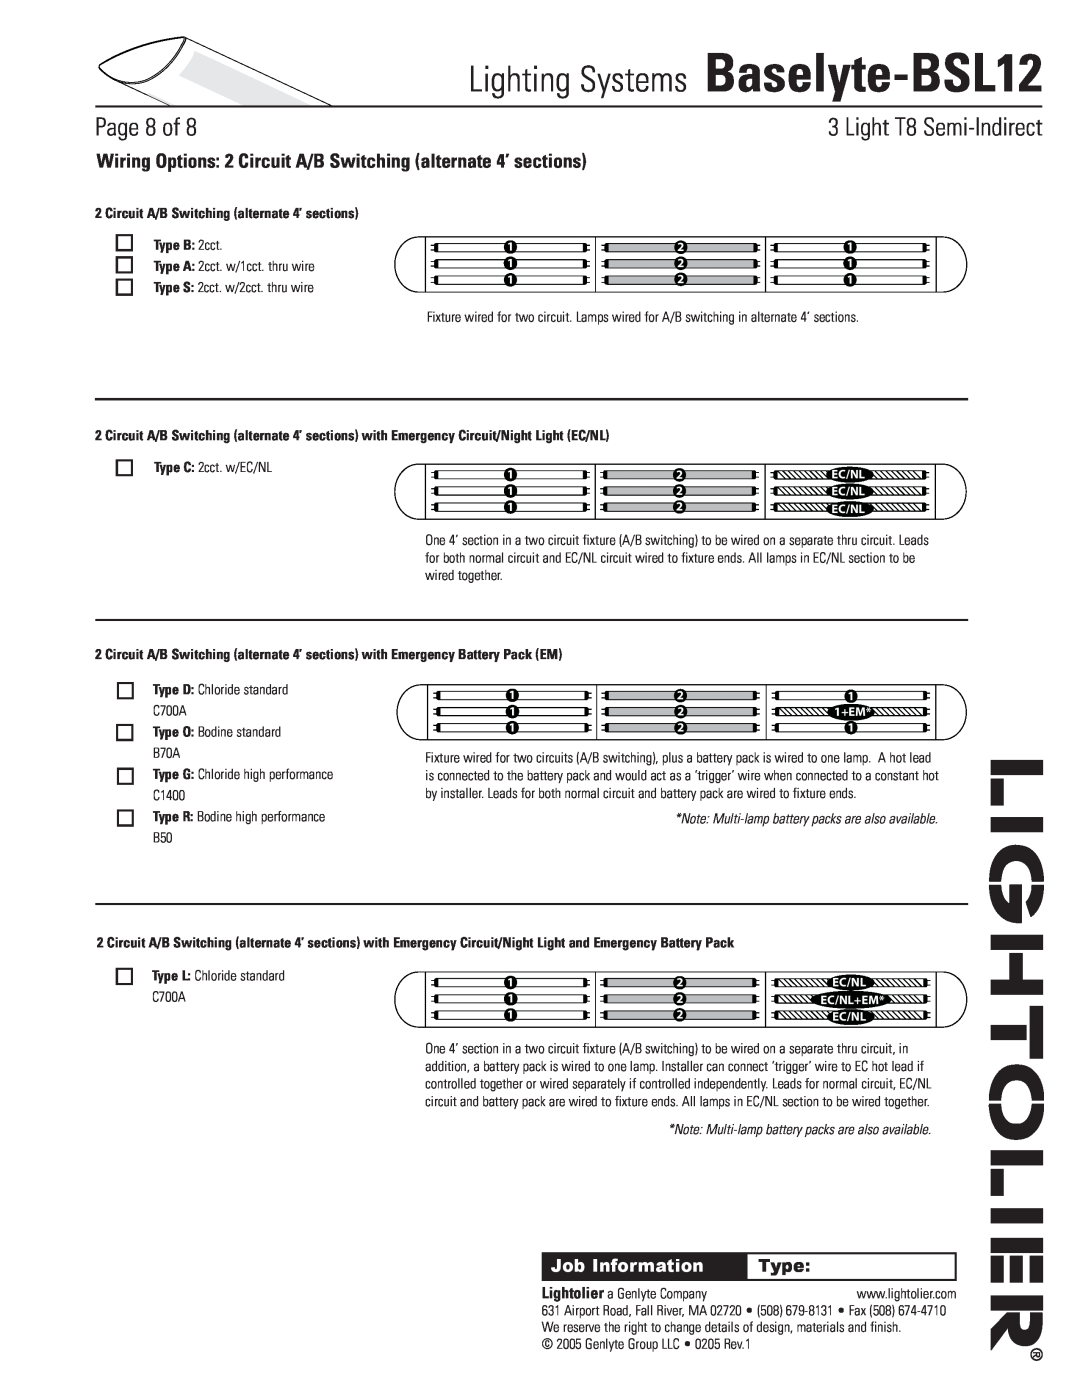 Lightolier Baselyte-BSL12 Circuit A/B Switching alternate 4’ sections, Type B 2cct, Type O Bodine standard B70A, Page of 